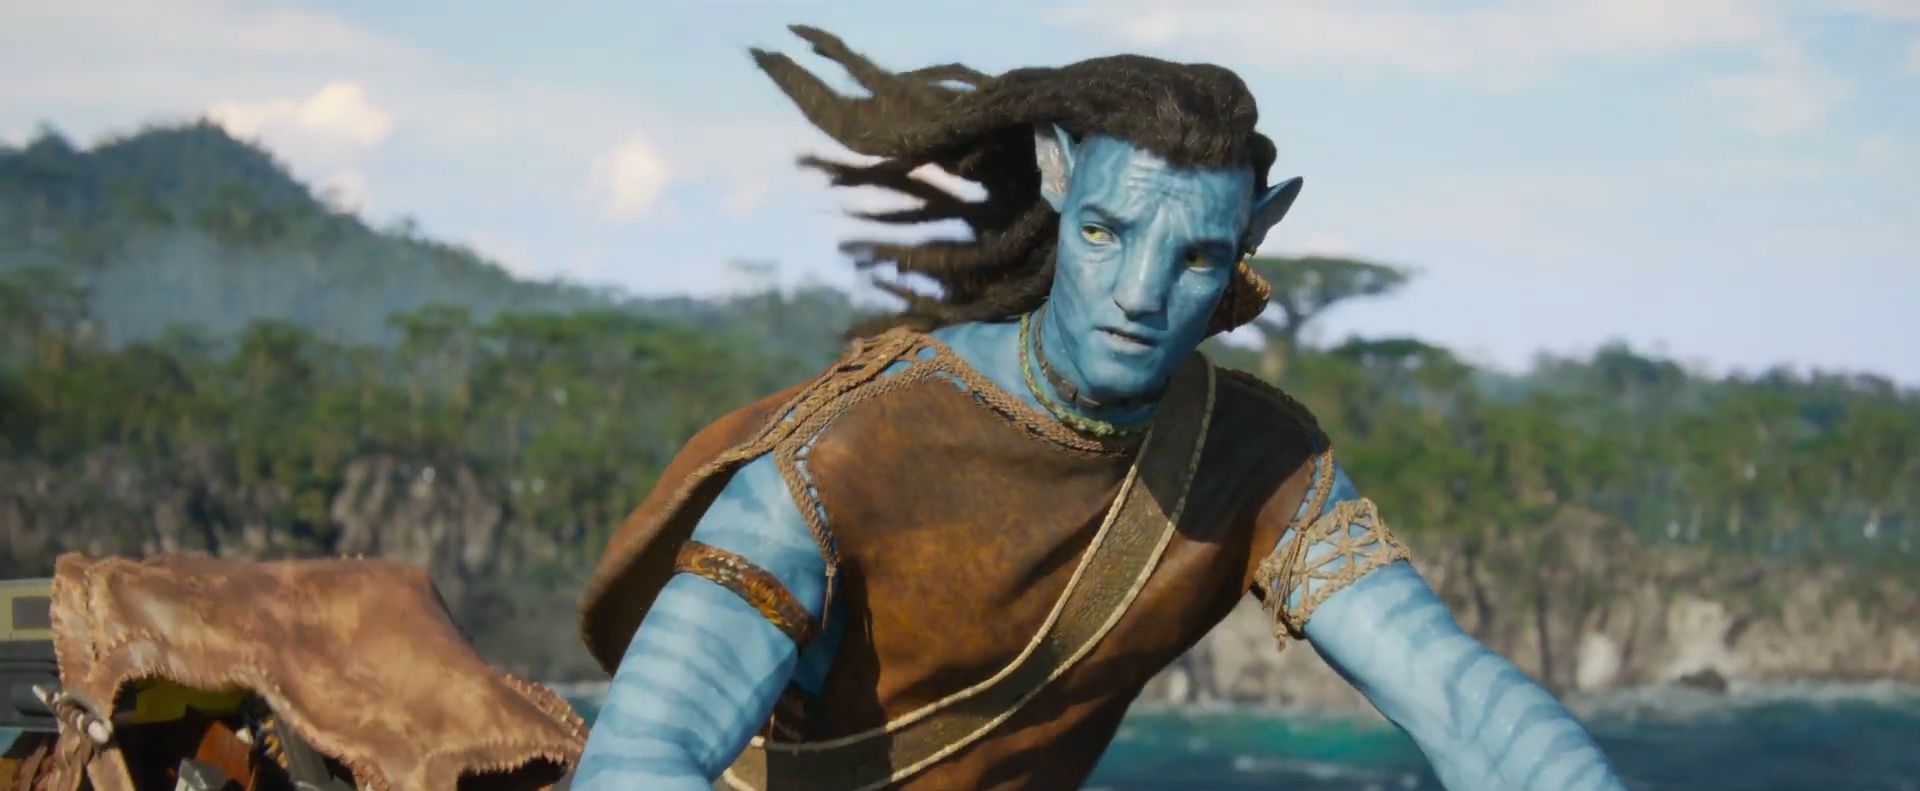 When Will Avatar The Way of Water Be Available to Stream